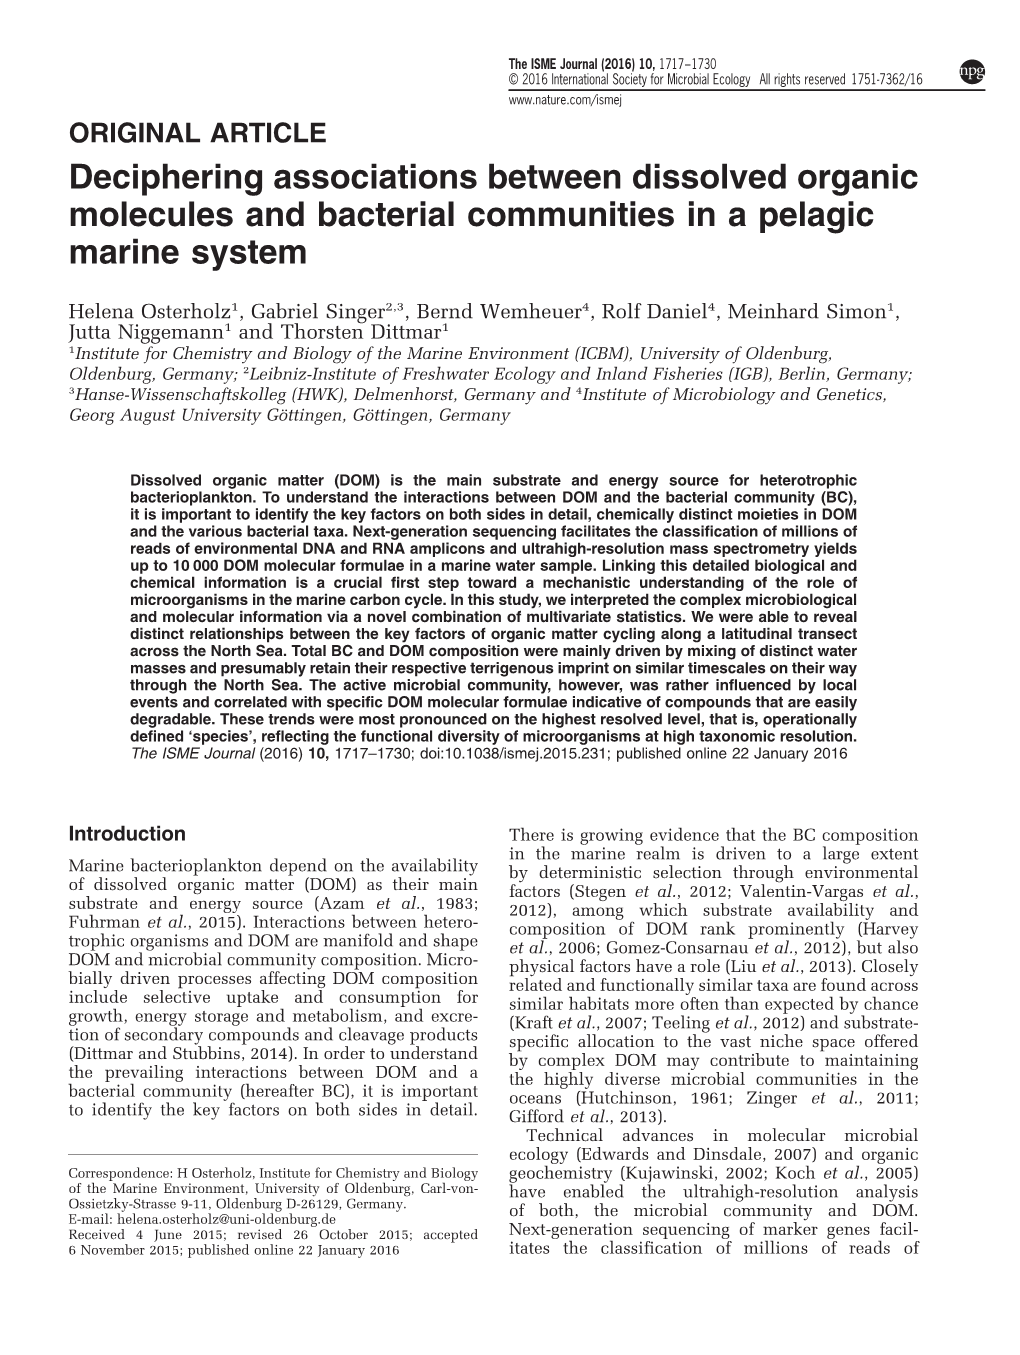 Deciphering Associations Between Dissolved Organic Molecules and Bacterial Communities in a Pelagic Marine System